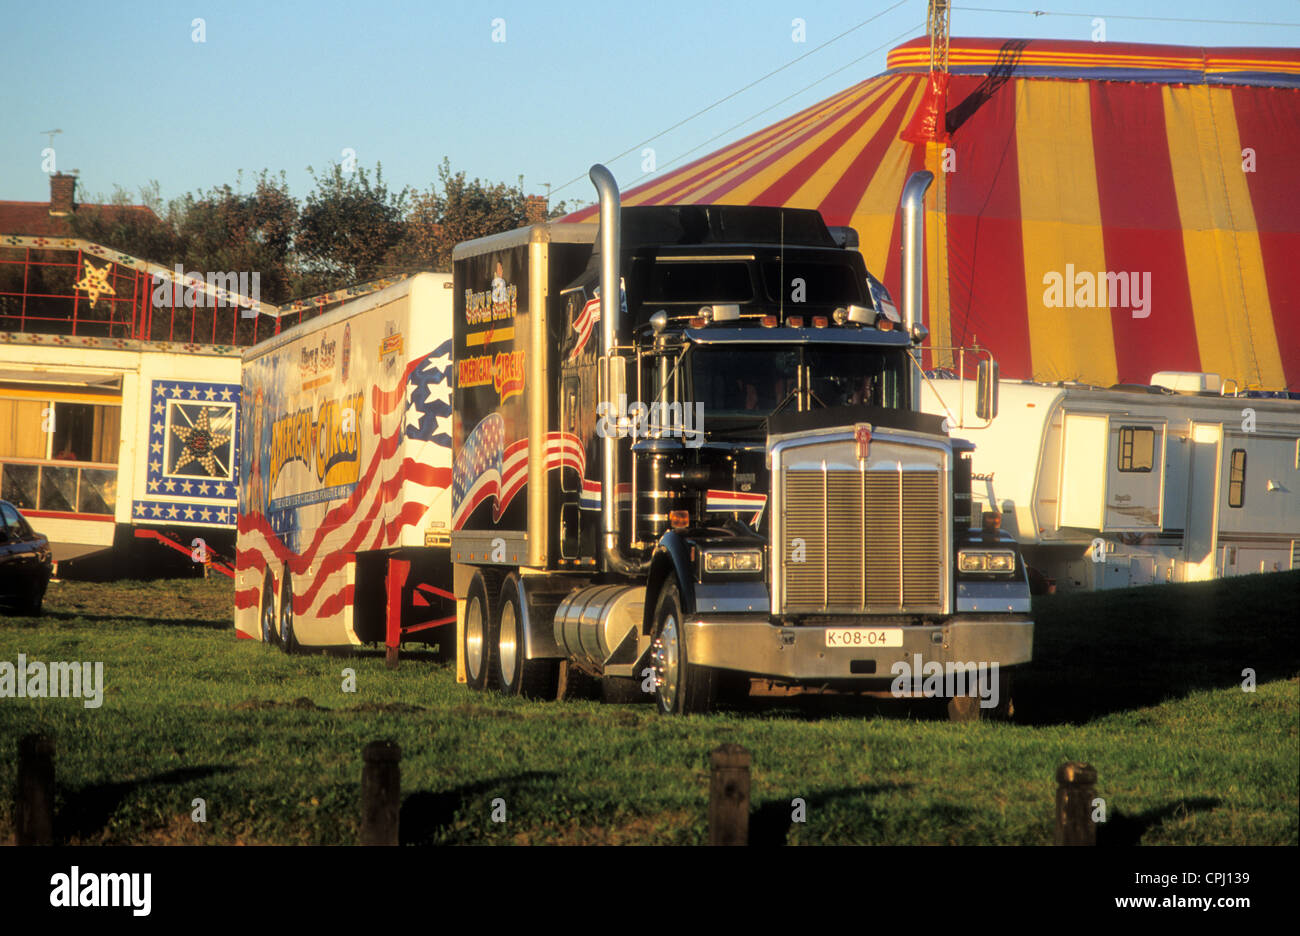 A stationary Kenworth Articulated HGV Truck  at 'Uncle Sam's Great American Circus' in the North East of England. Stock Photo